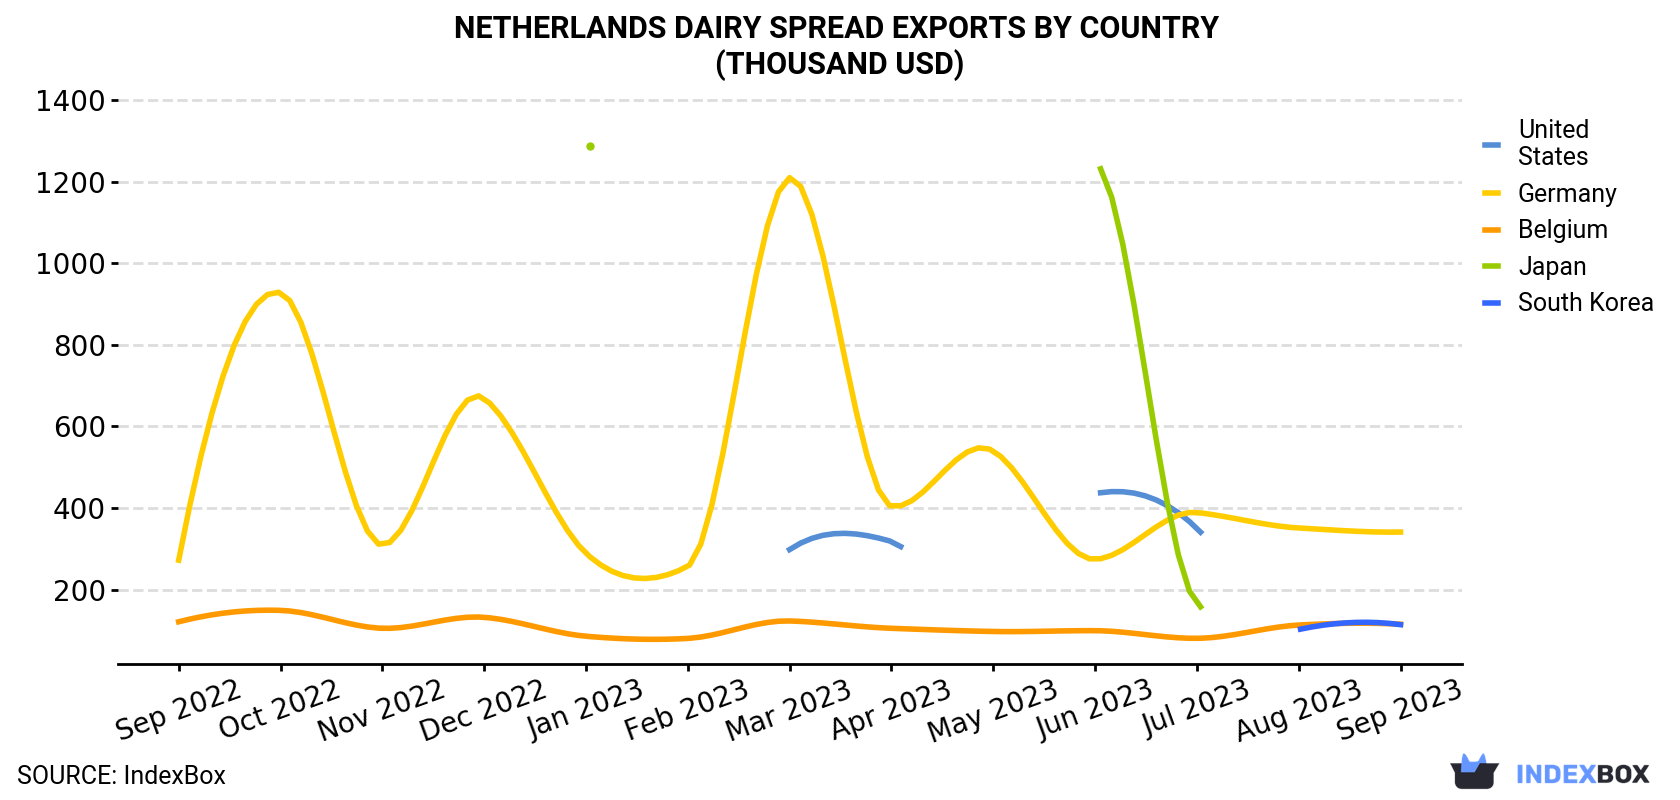 Netherlands Dairy Spread Exports By Country (Thousand USD)